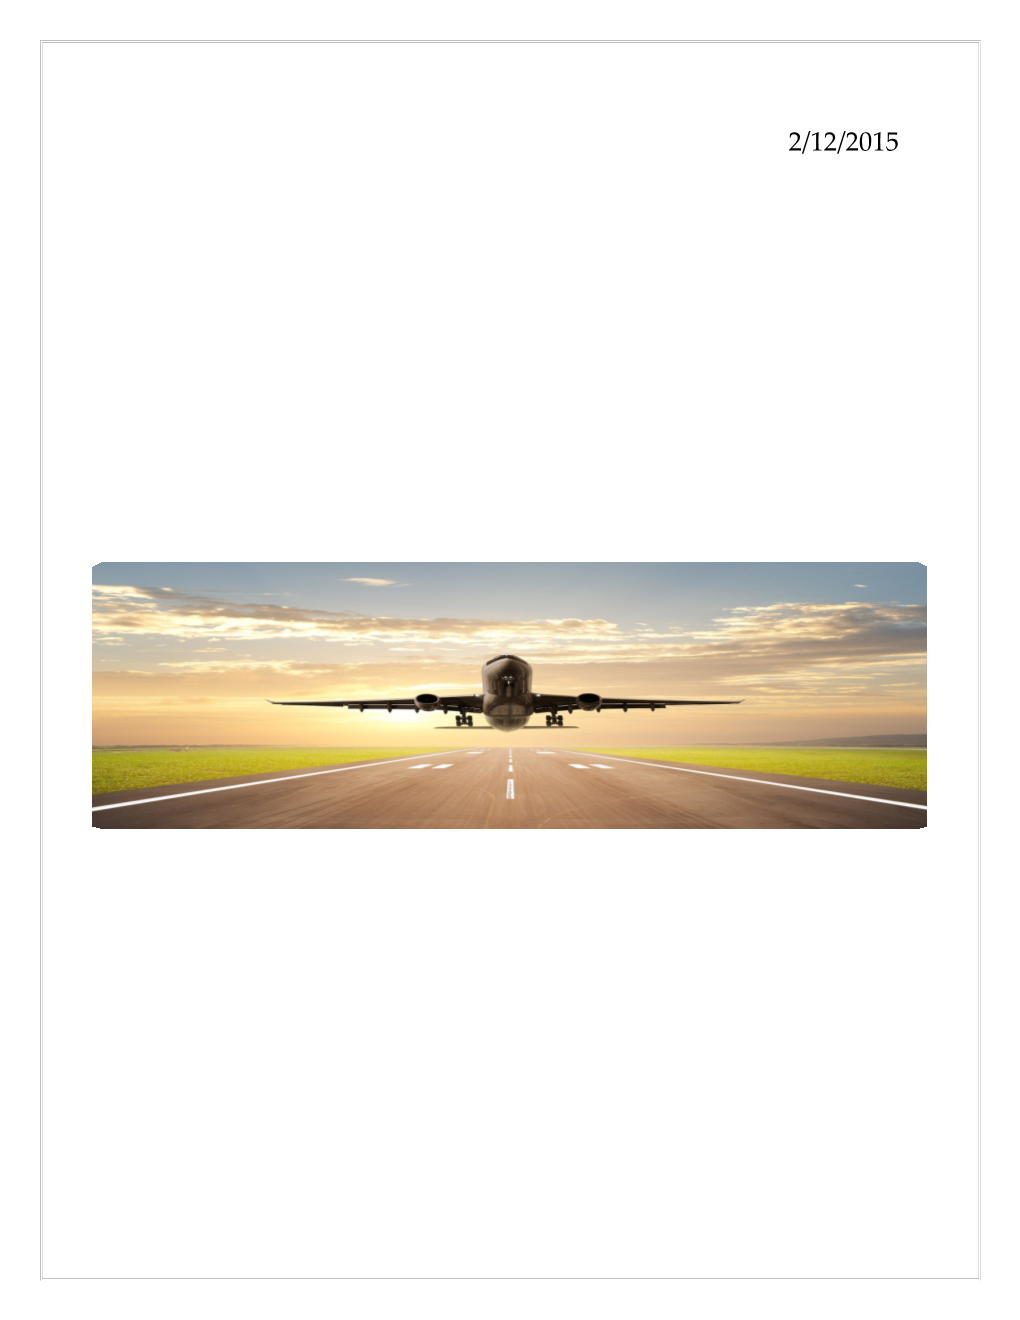 Research and Analysis of Indian Aviation Industry